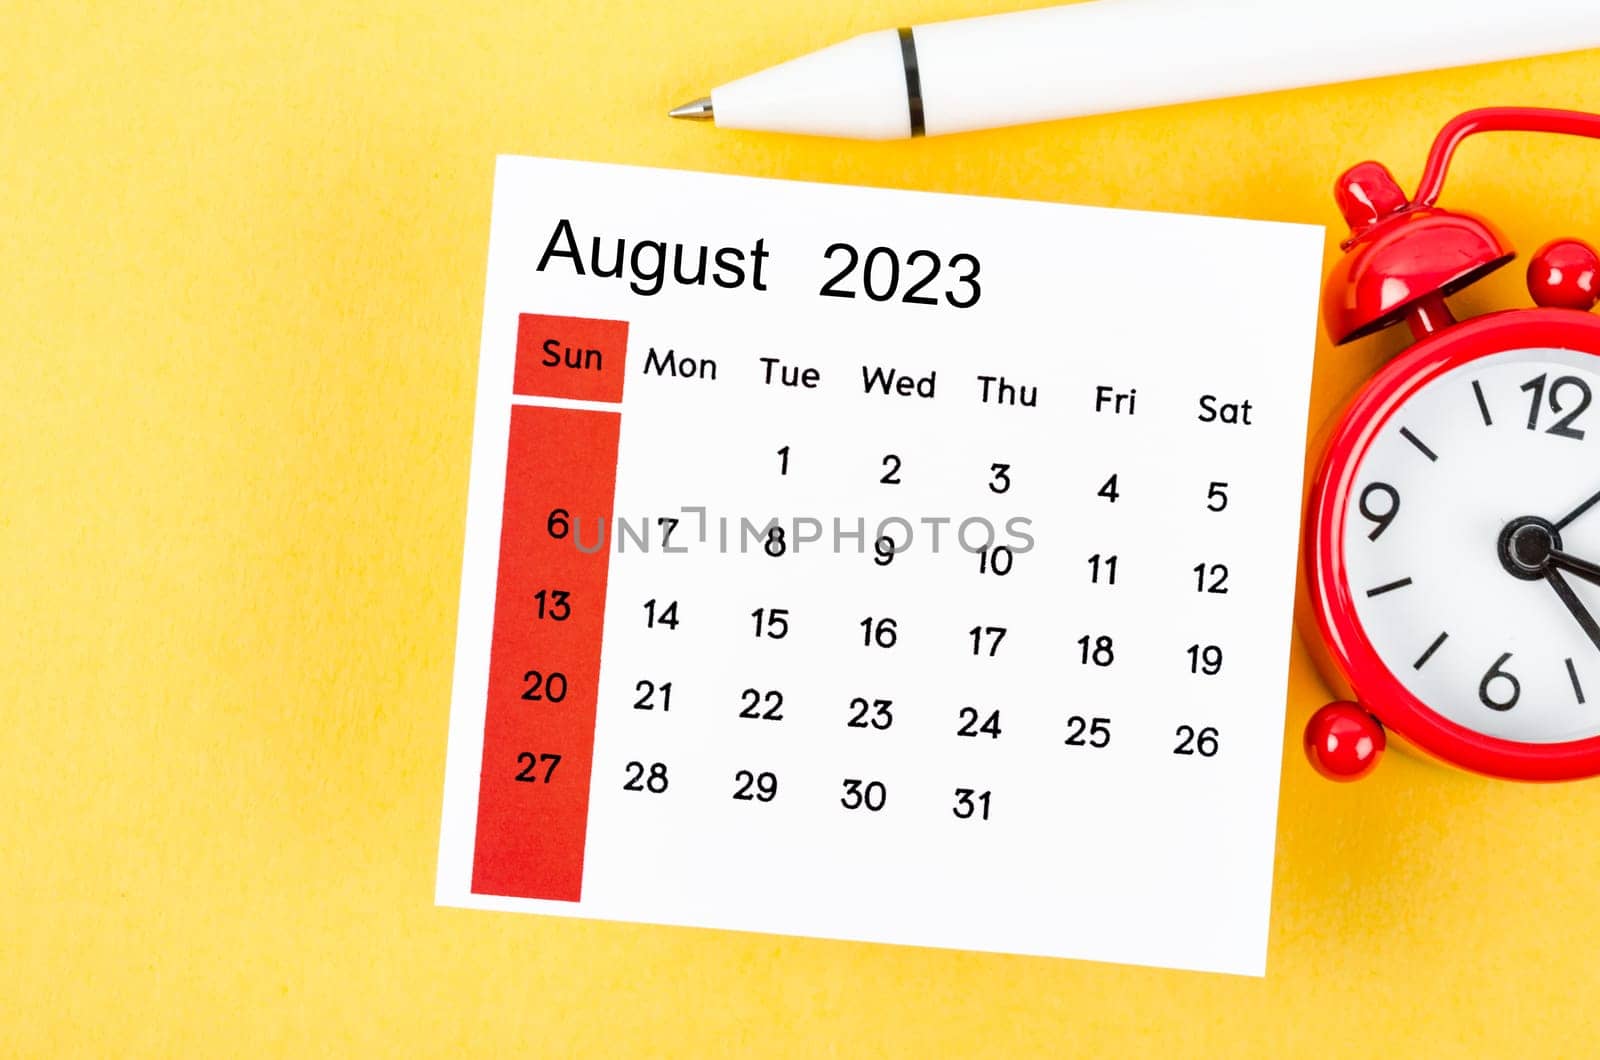 August 2023 Monthly calendar for 2023 year with alarm clock on yellow background.